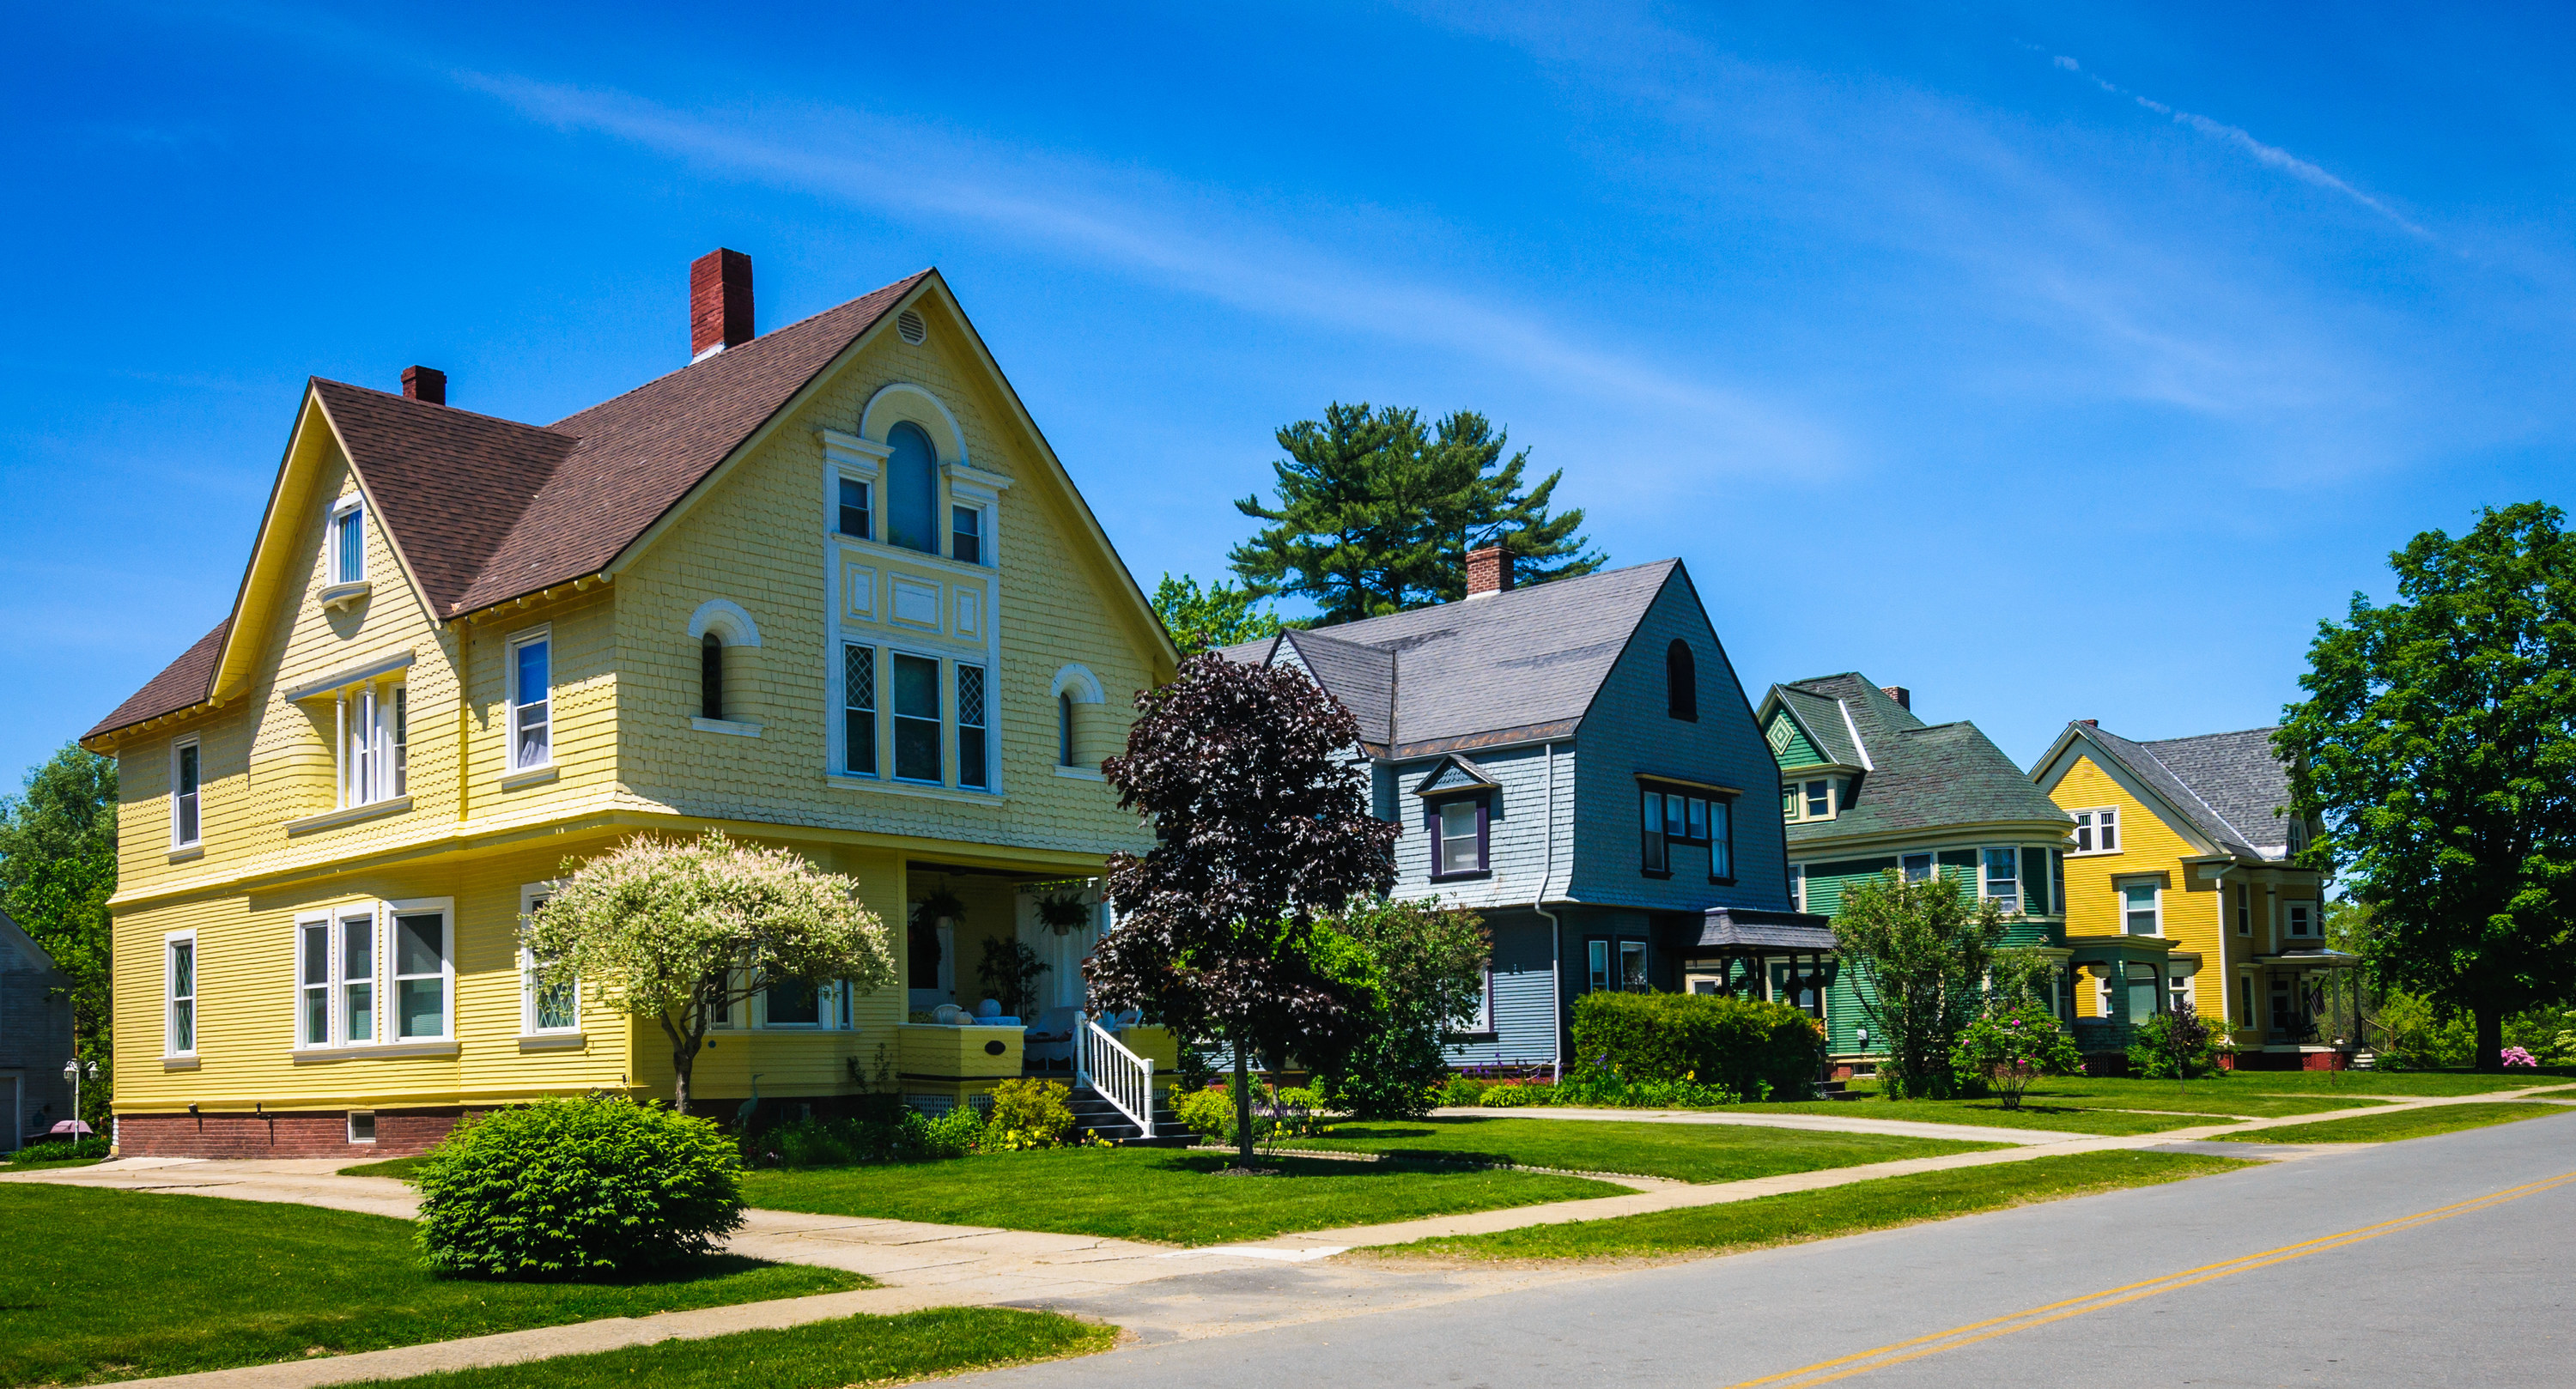 A row of well maintained, colorful, 19th century homes along a quiet street in a northern Vermont small town